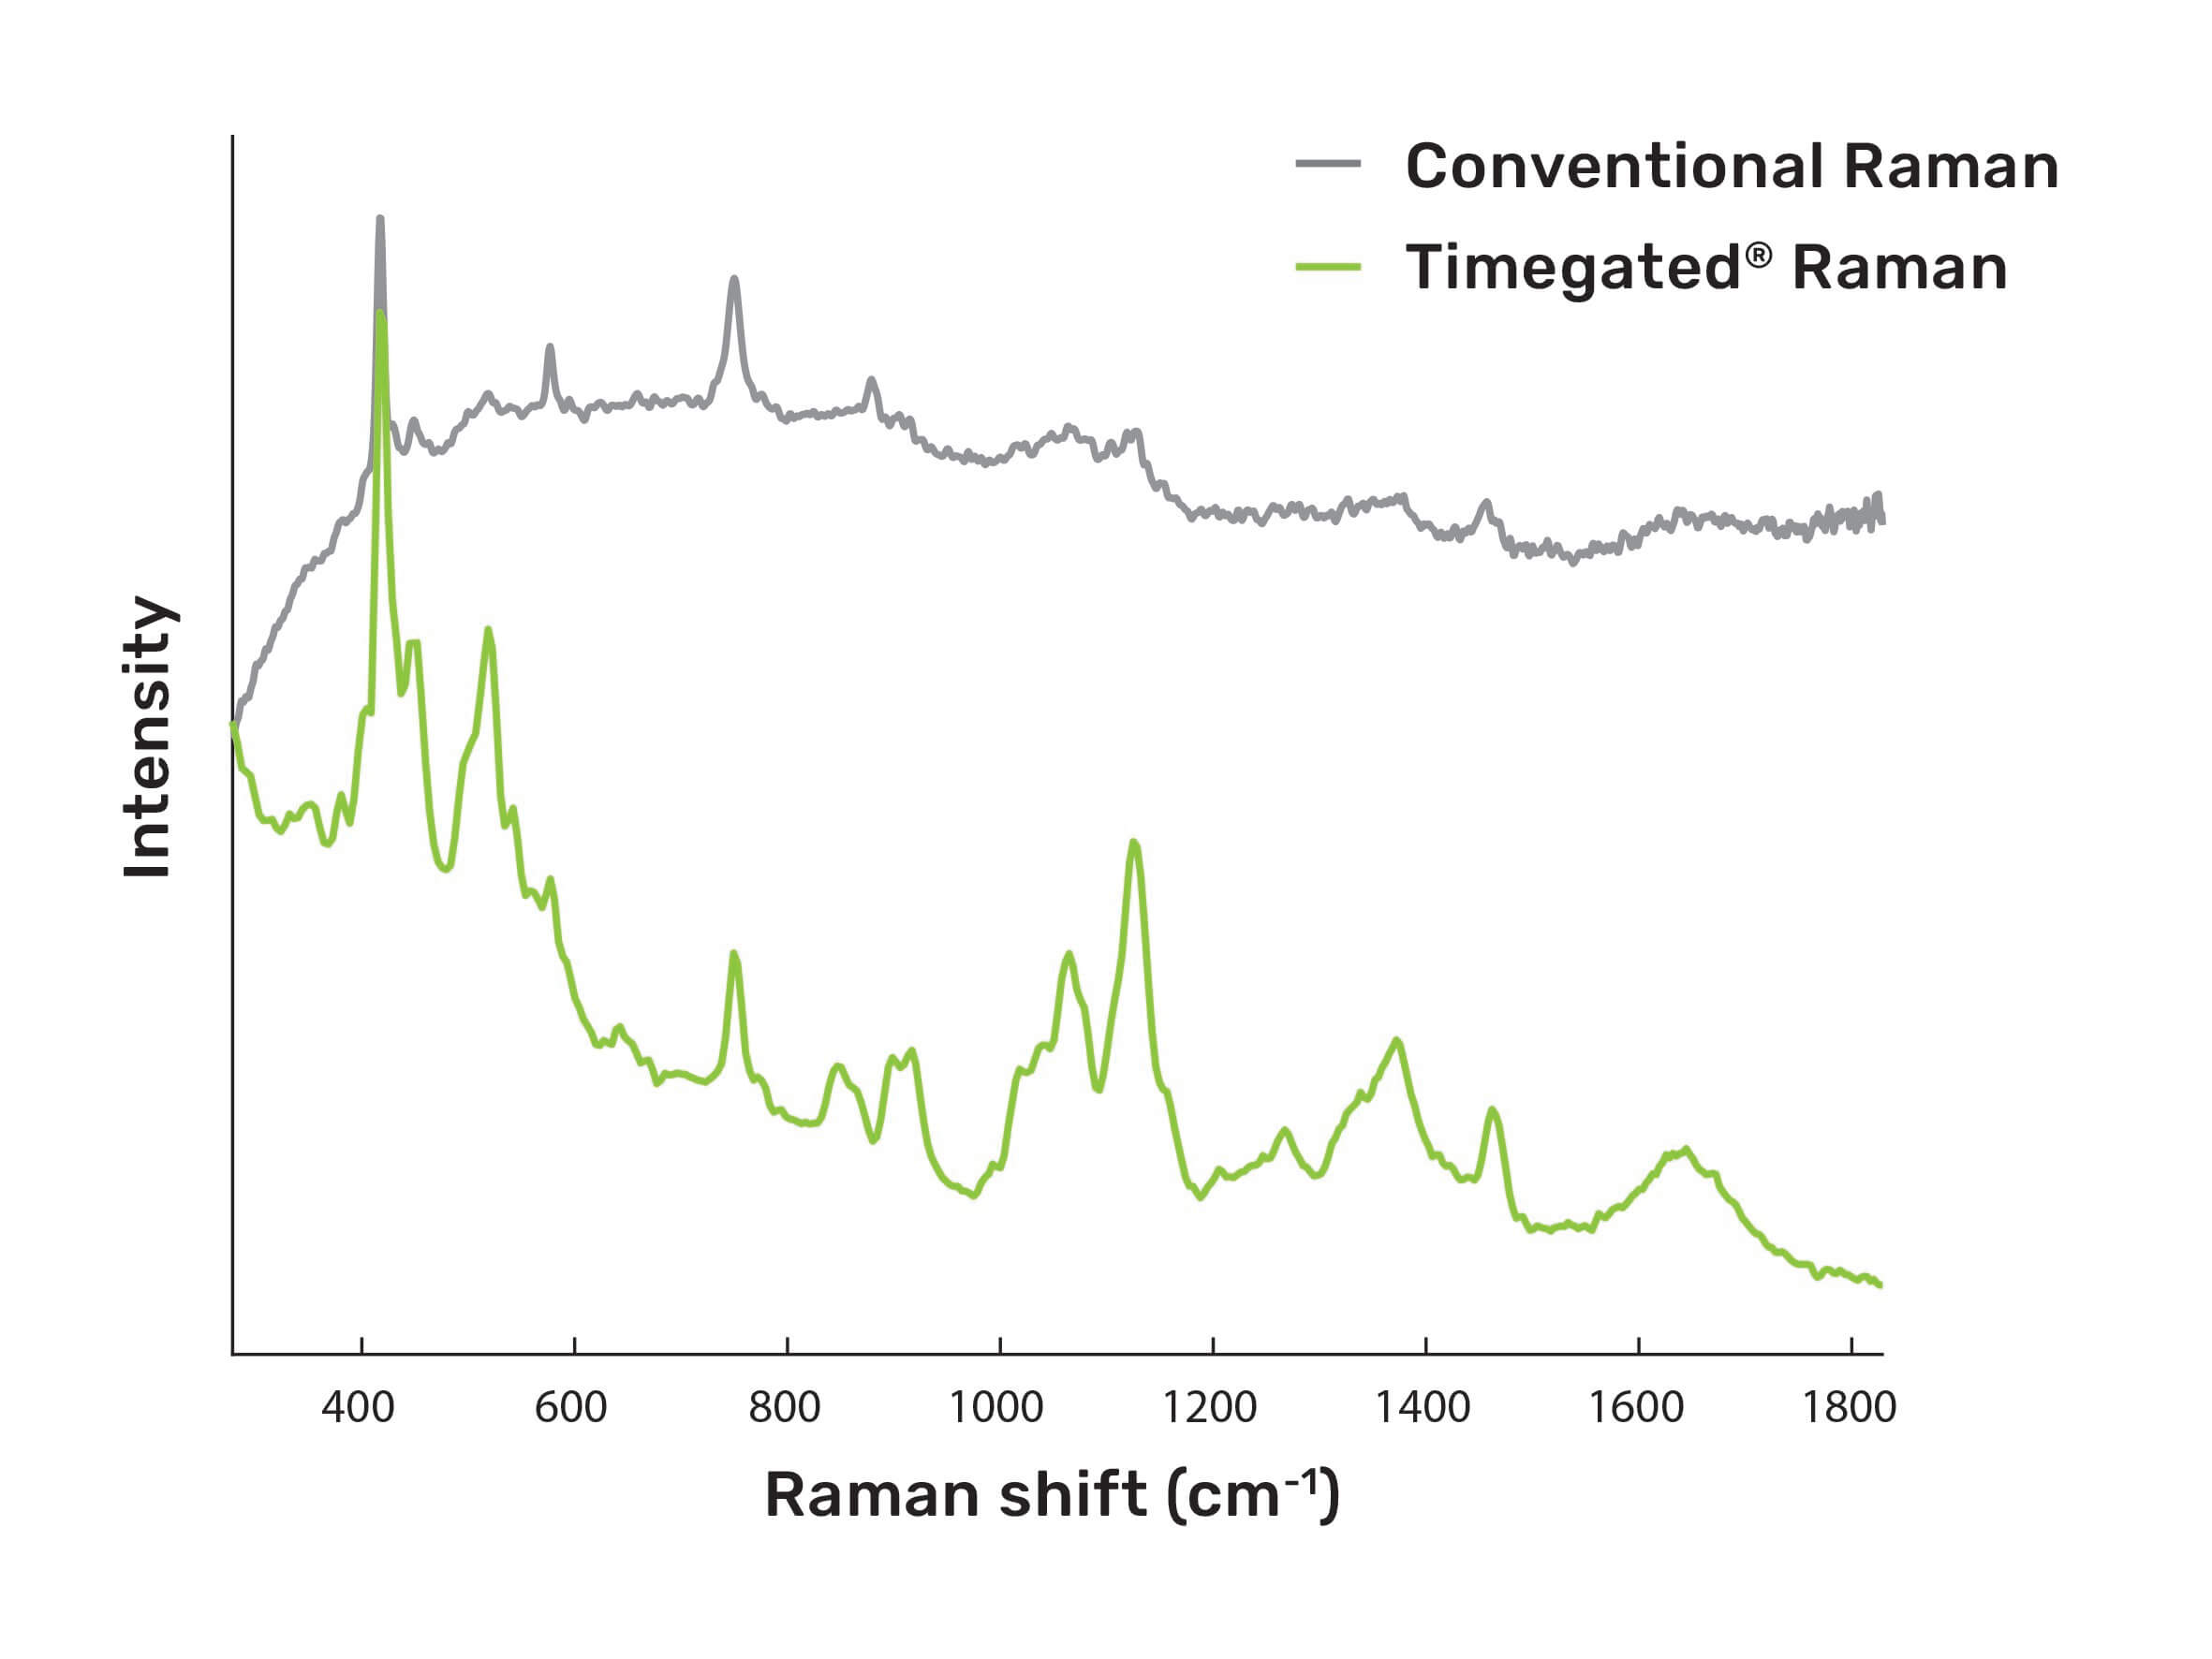 Comparison spectra of conventional and time-gated Raman.